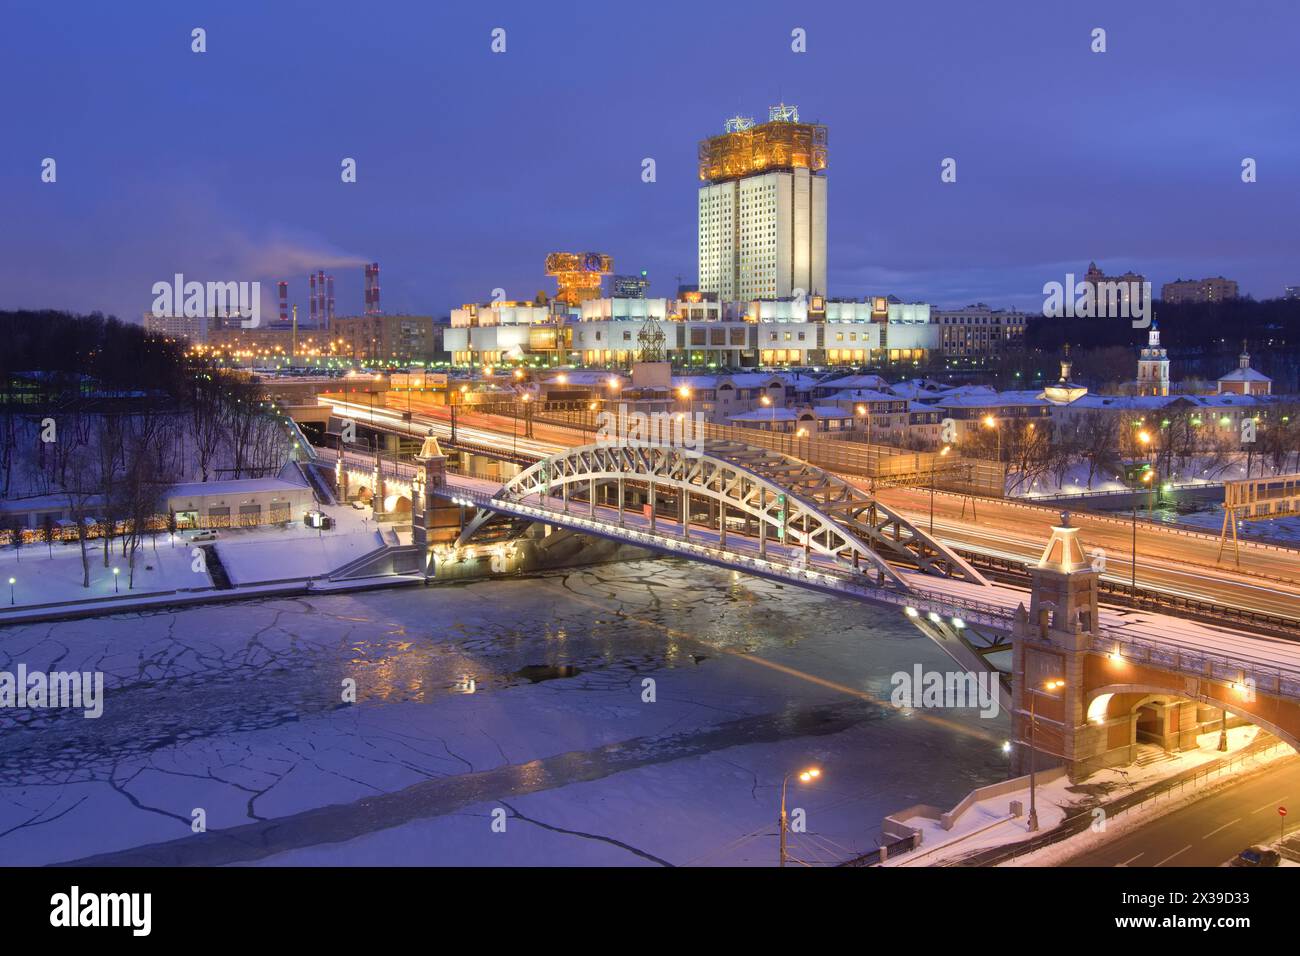 MOSCOW, RUSSIA - DEC 26, 2014: Building of Presidium of Russian Academy of Sciences, Bridge over Moskva River at evening in Moscow Stock Photo